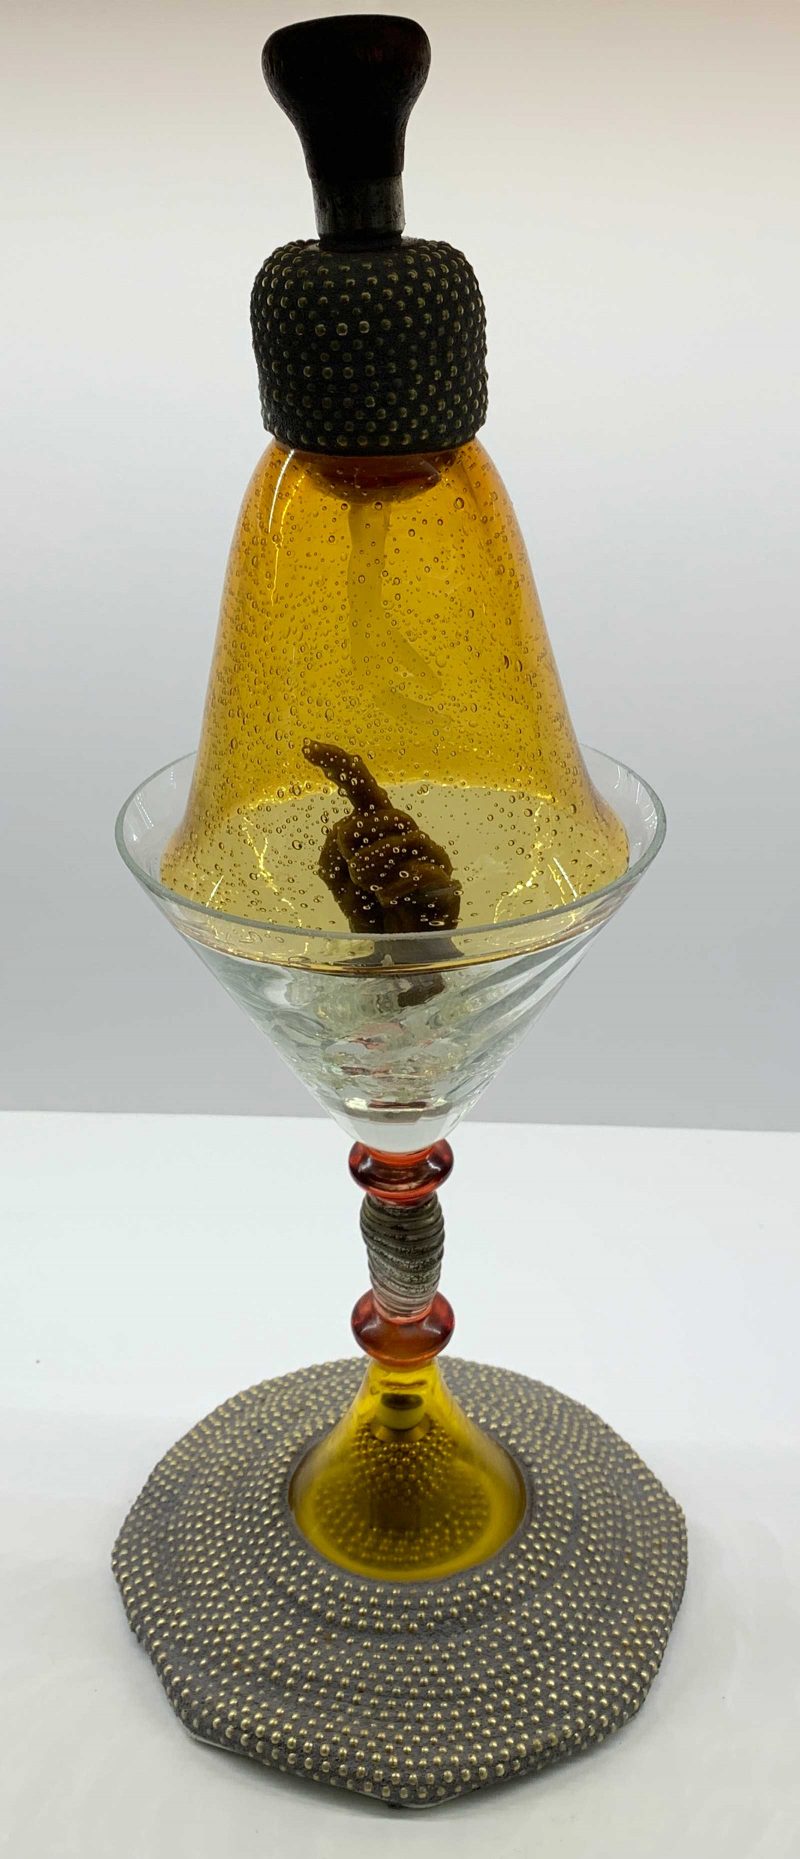 marini glass with a hand with a pointed figure inside covered by a glass dome.